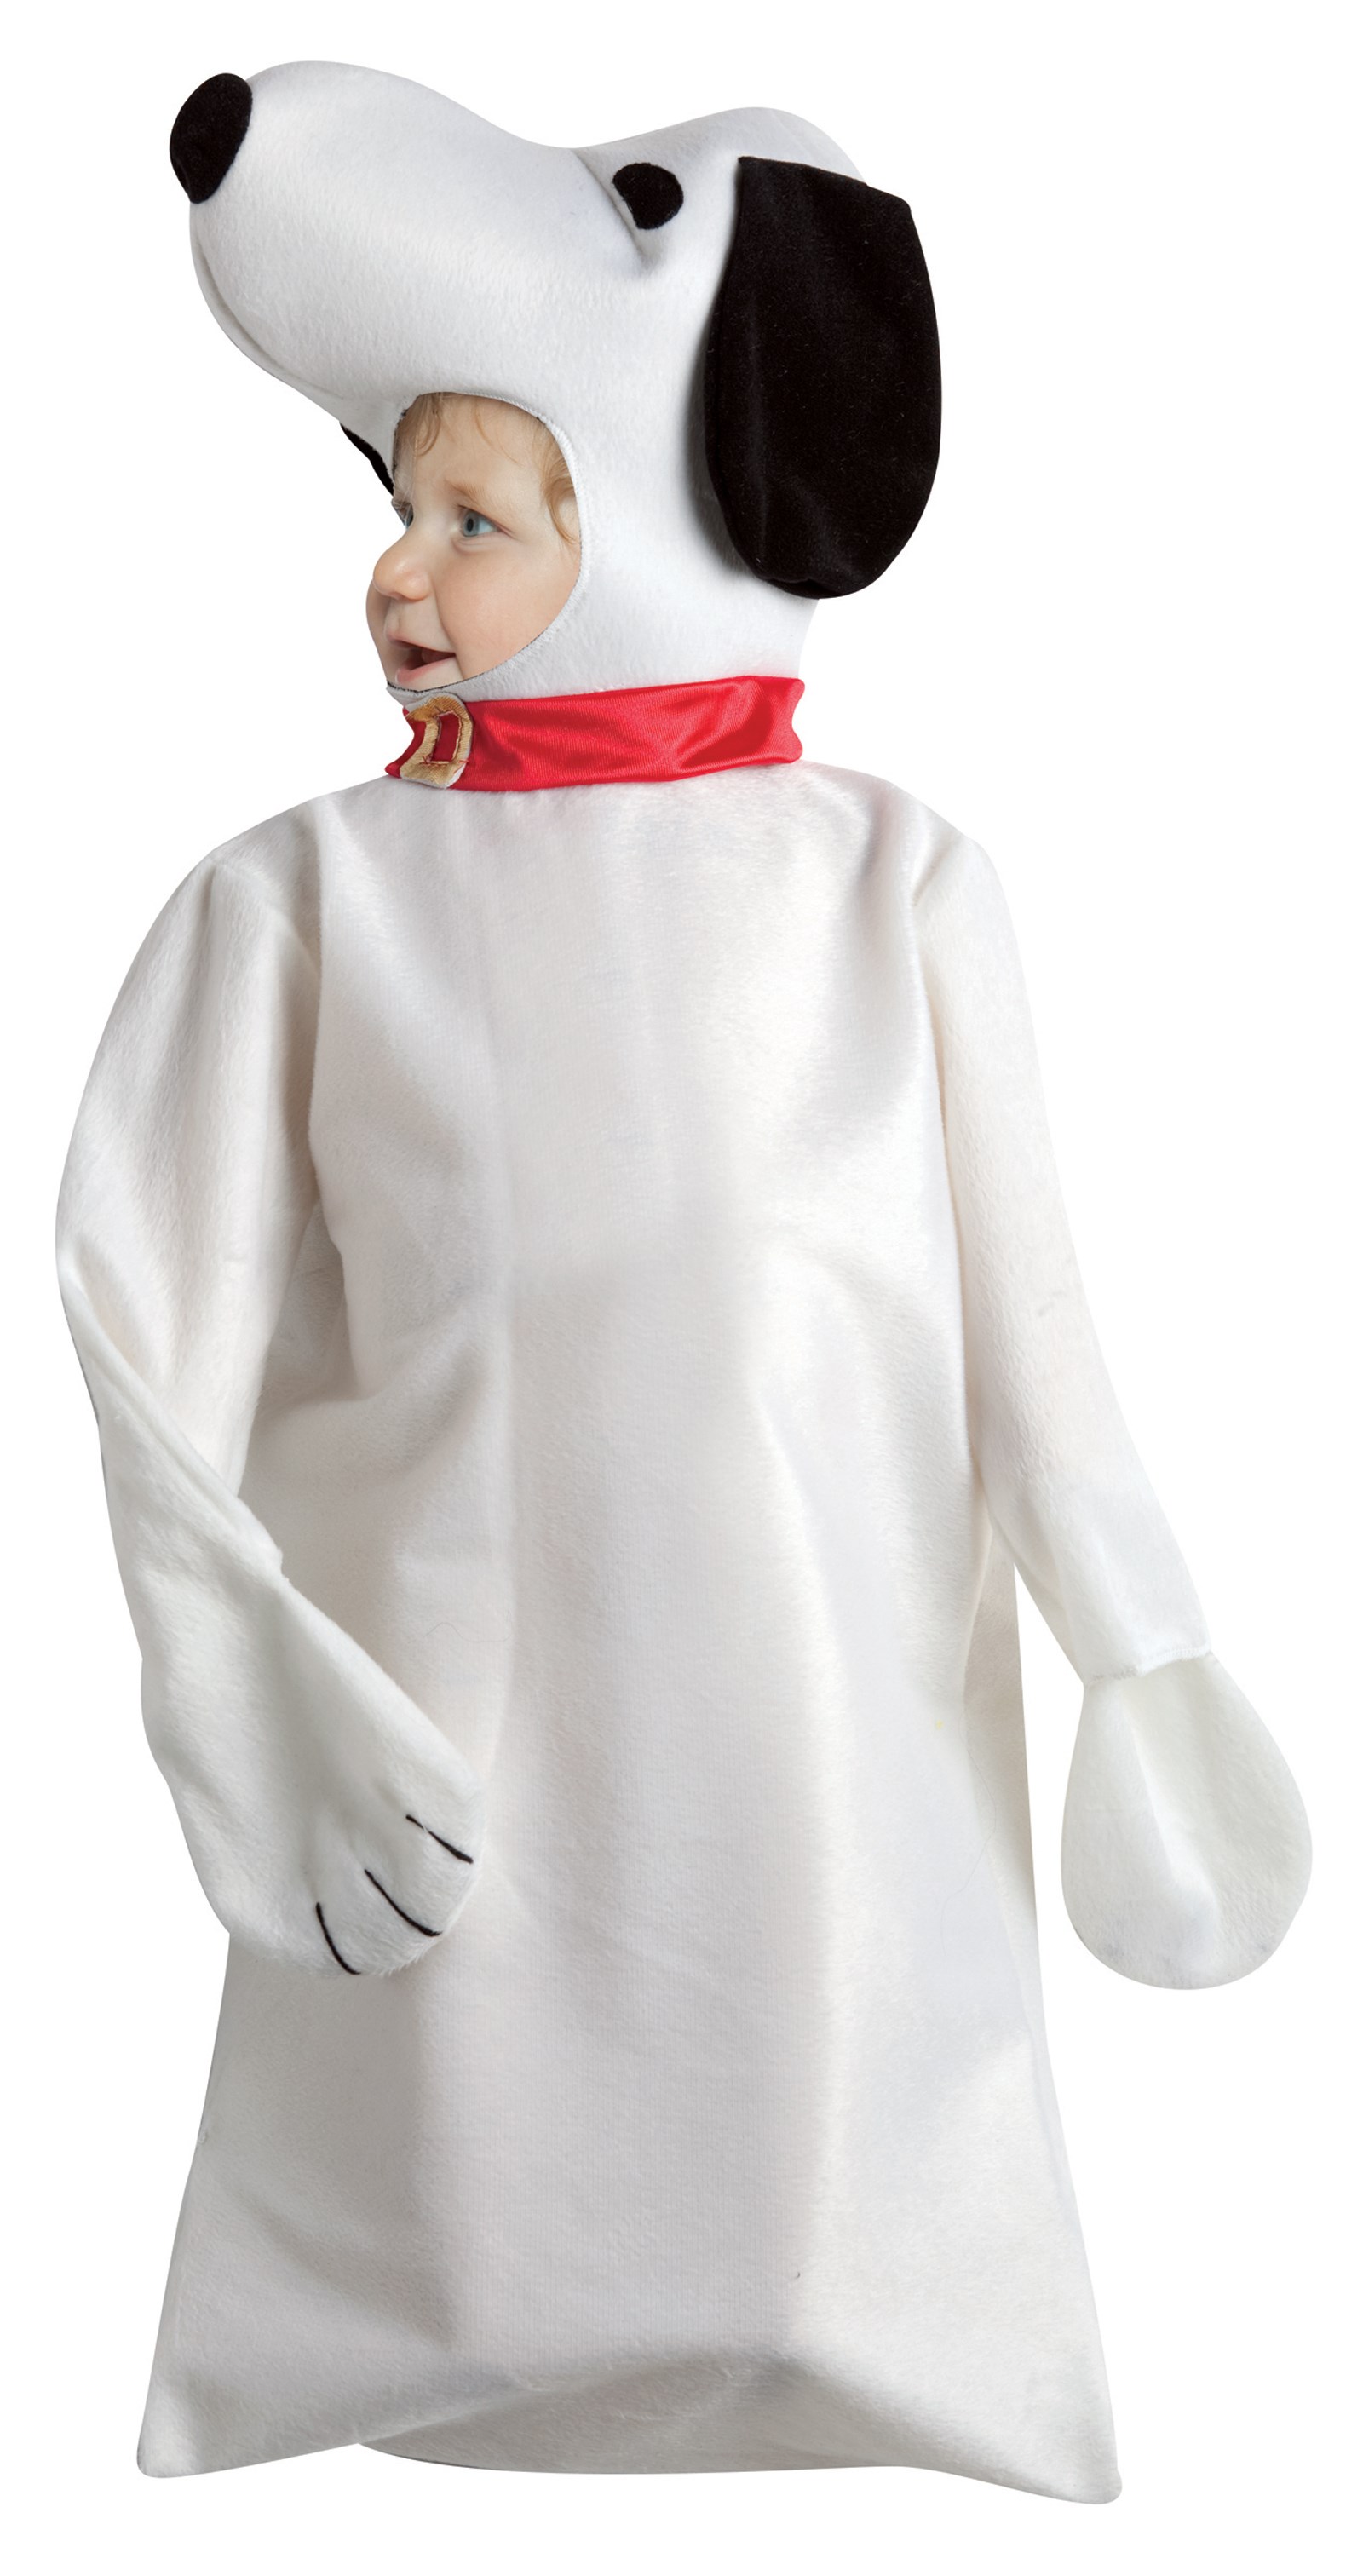 Peanuts Snoopy Bunting Costume